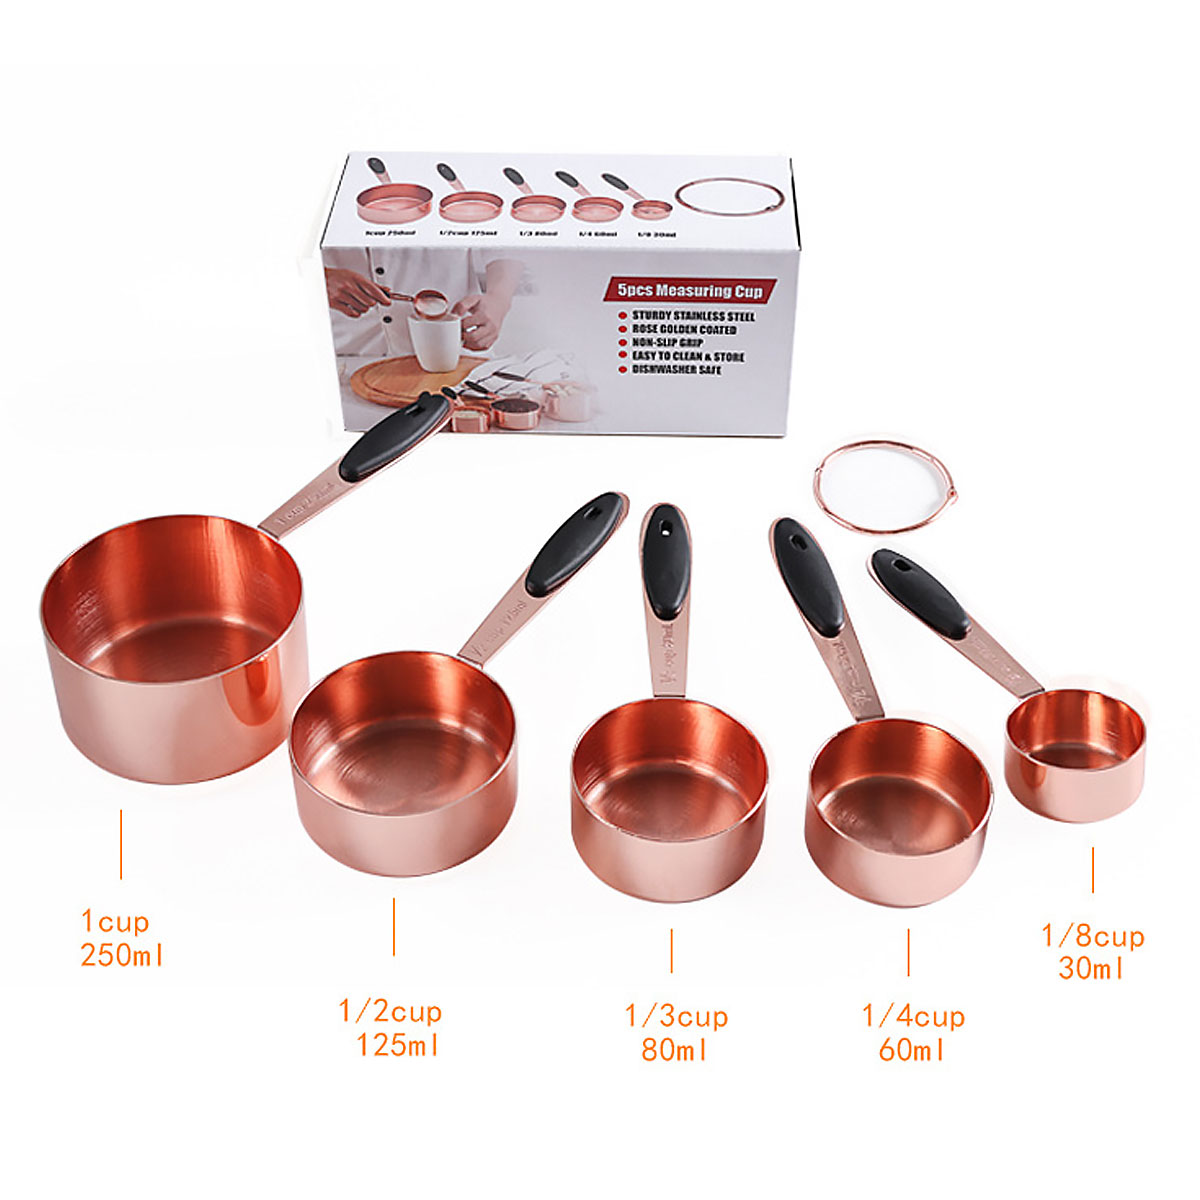 5Pcs-Measuring-Cup-Set-Stainless-Steel-Kitchen-Accessories-Baking-Bartending-Tools-1722150-6